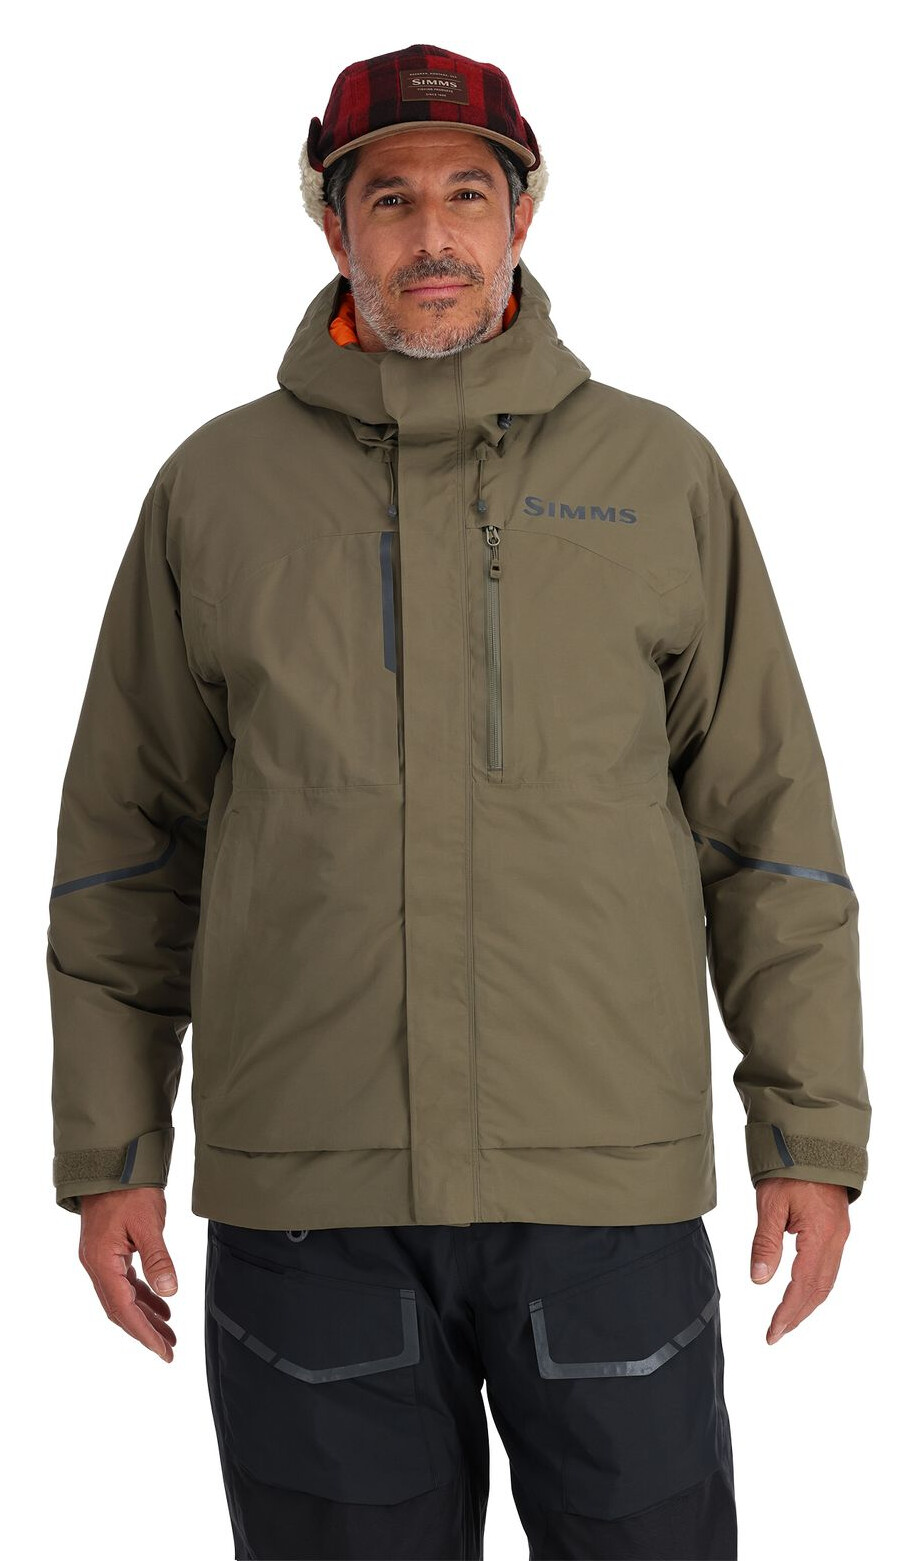 https://www.czechnymph.com/data/web/auto-imported-products/simms/simms-simms-challenger-insulated-jacket-2-aa68d904.jpg